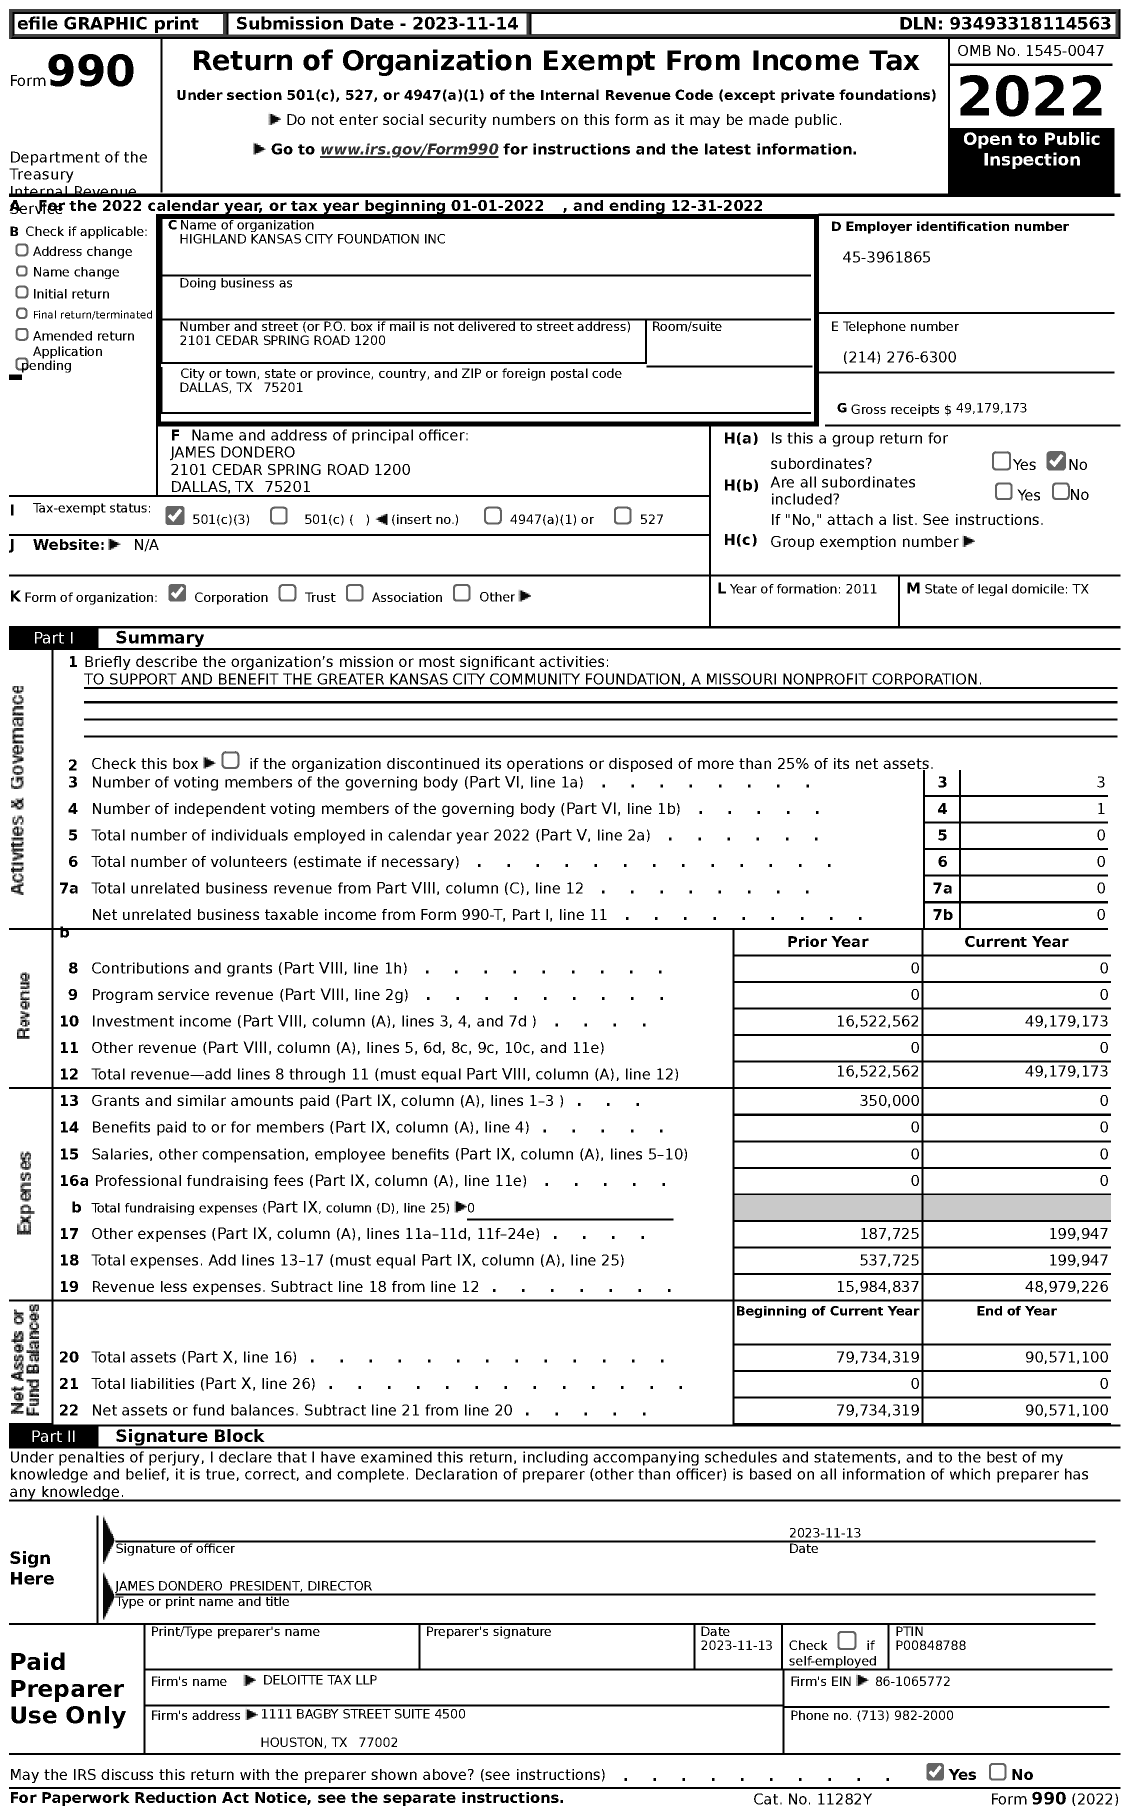 Image of first page of 2022 Form 990 for Highland Kansas City Foundation